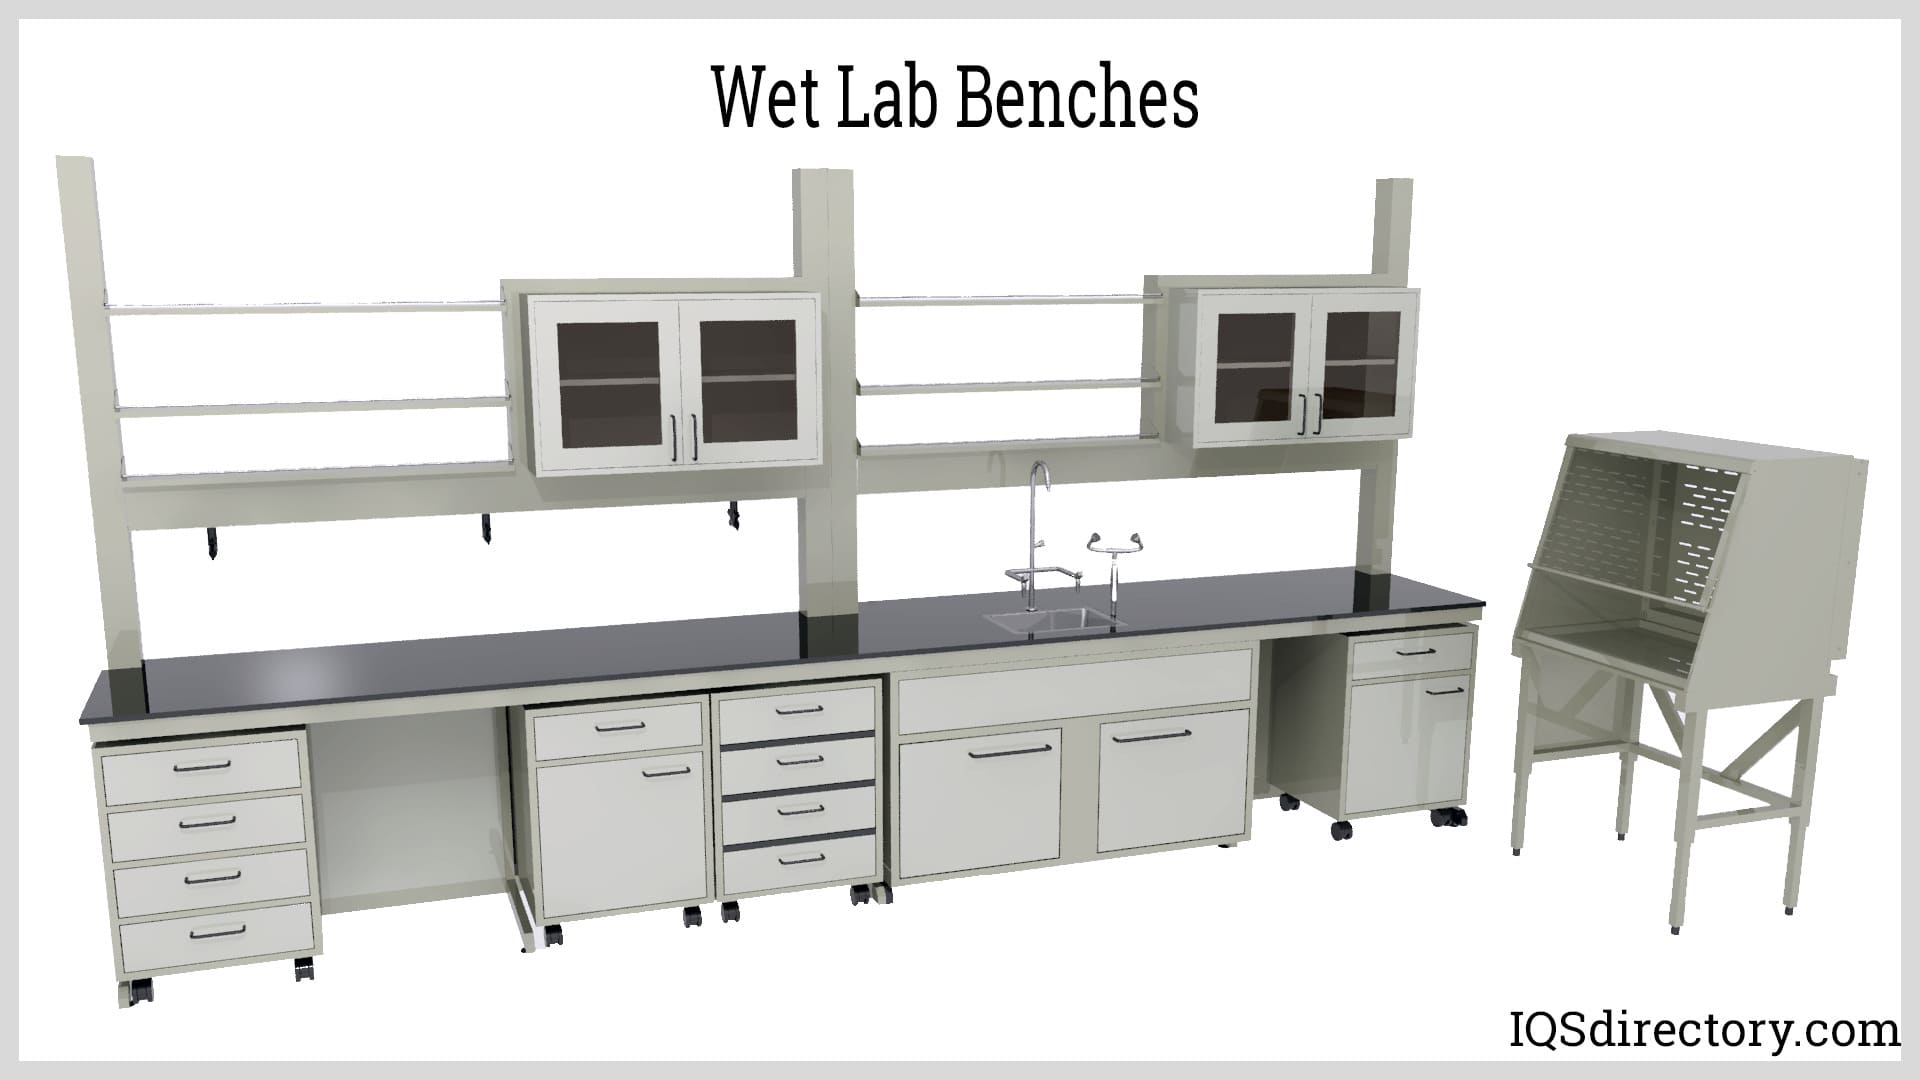 Wet Lab Benches